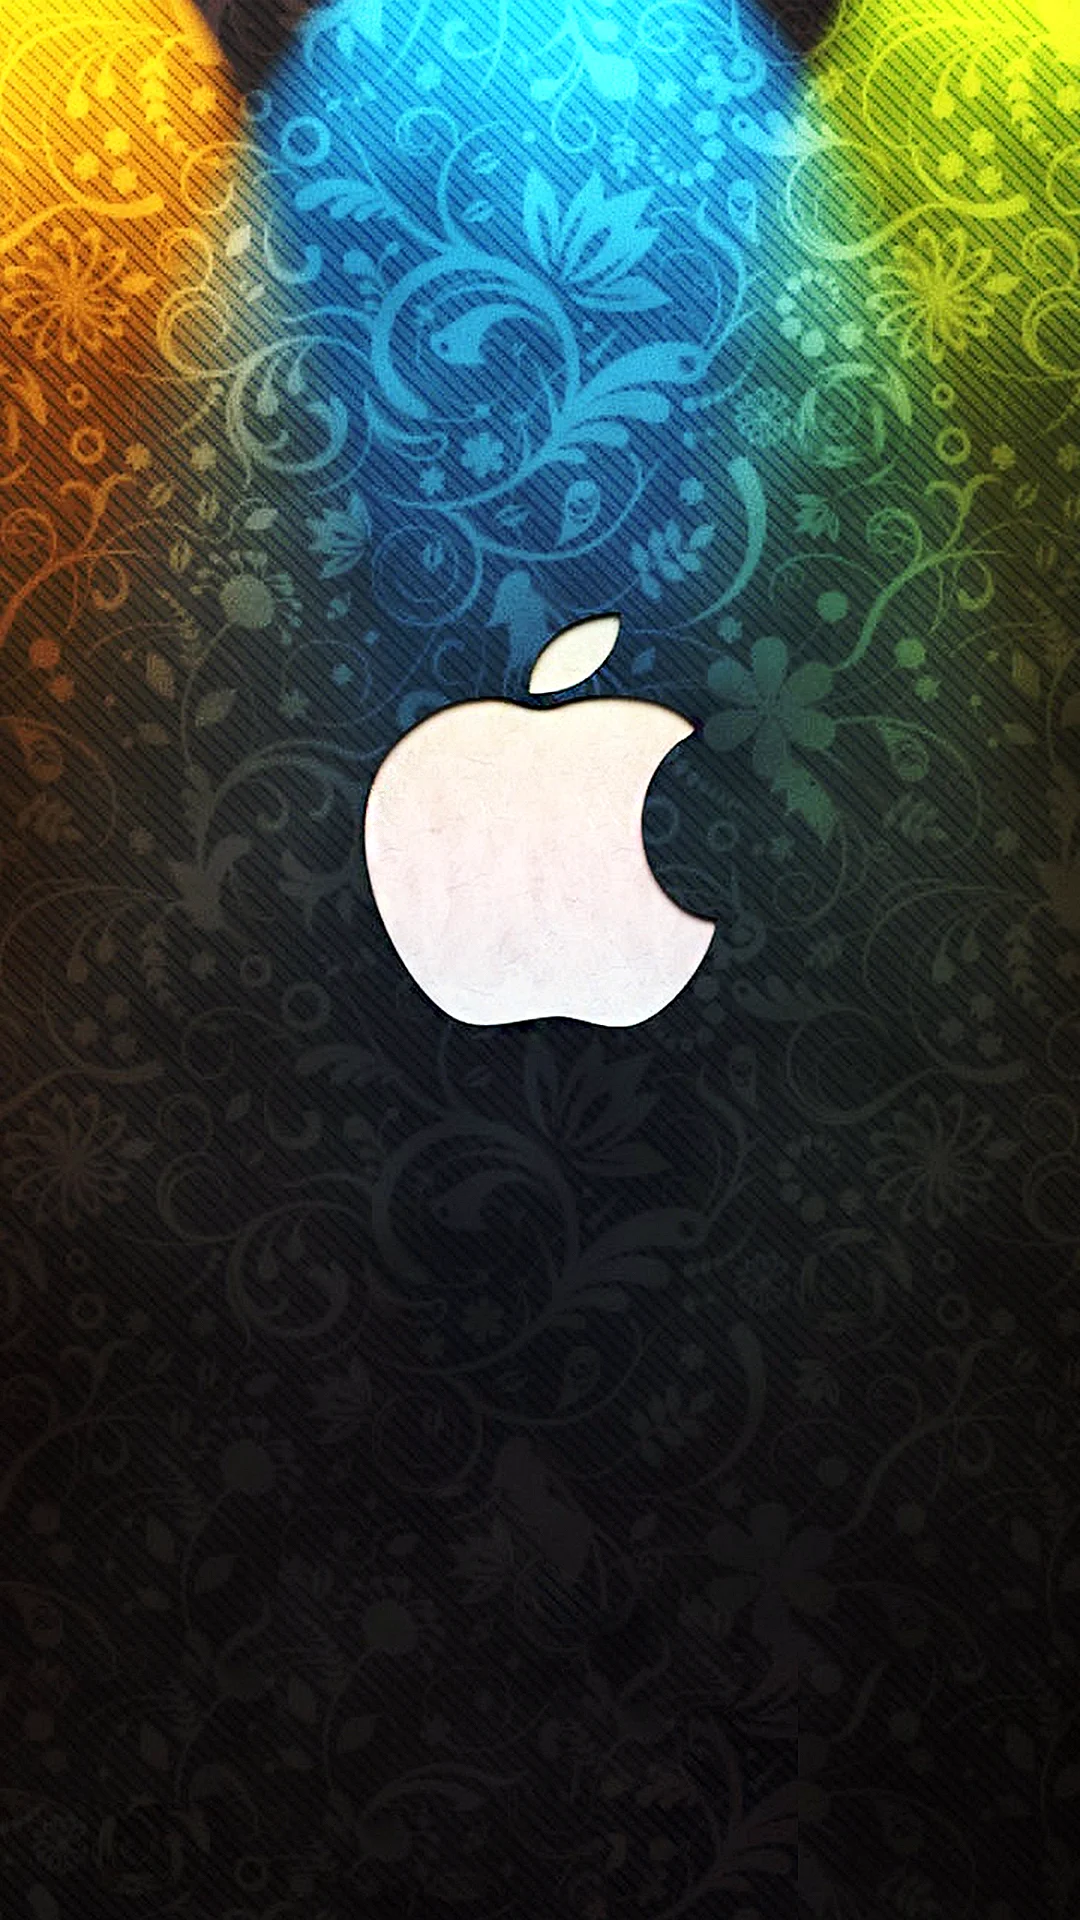 Oboi iPhone 5s Wallpaper For iPhone